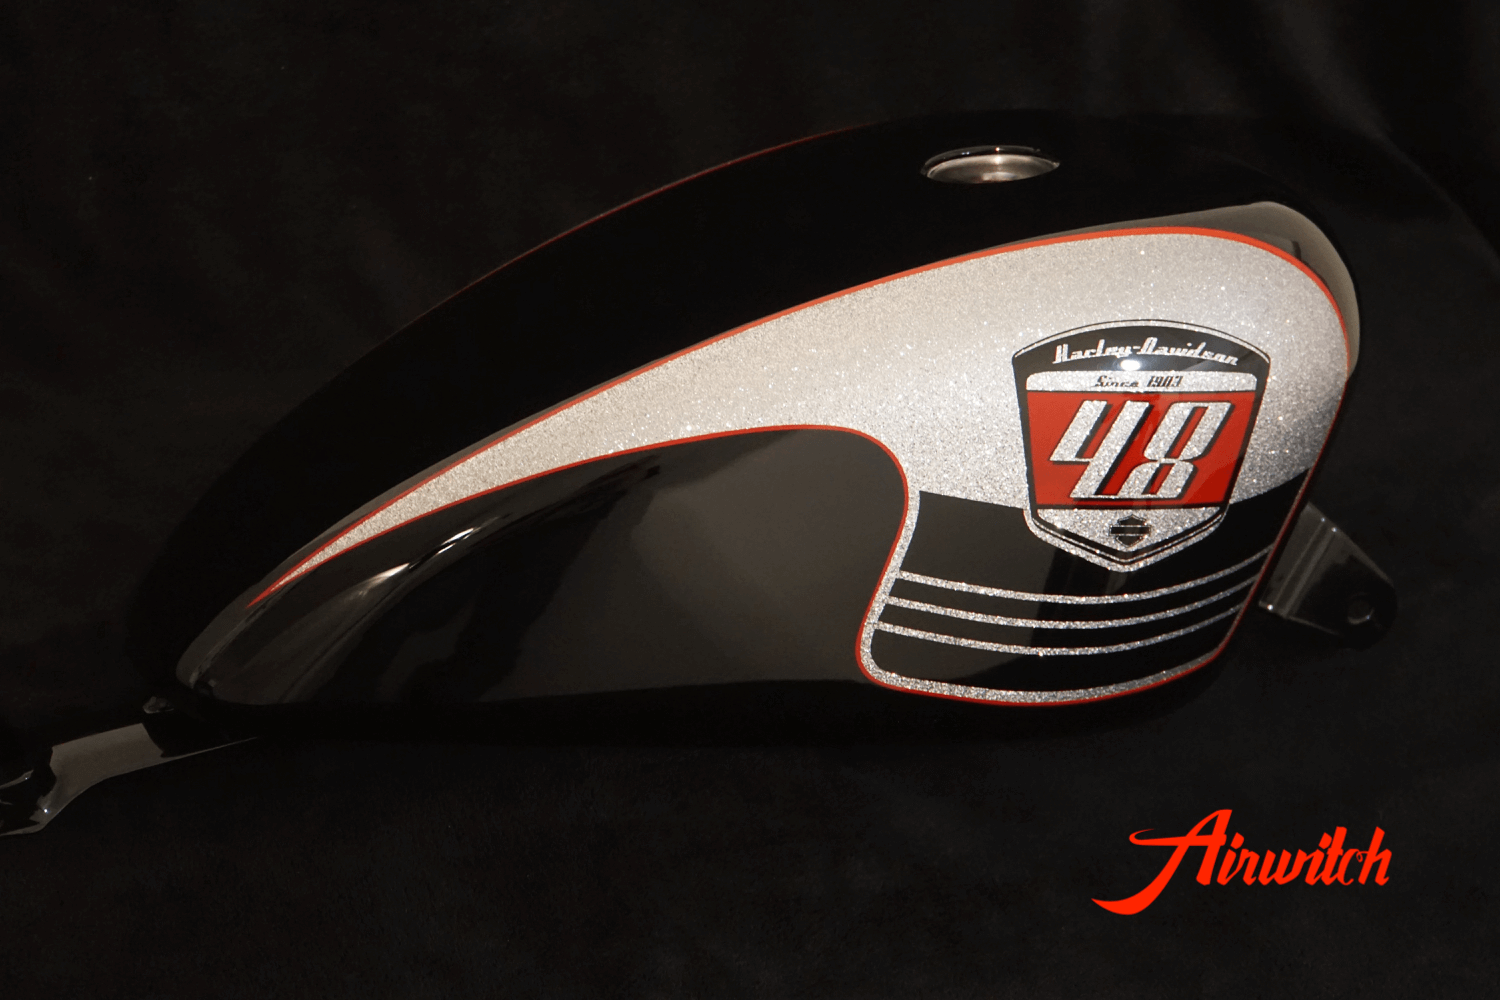 Custom Paint Harley Davidson Forty Eight Retro Racing Lackierung Metalflakes in schwarz, silber, rot mit Scalop